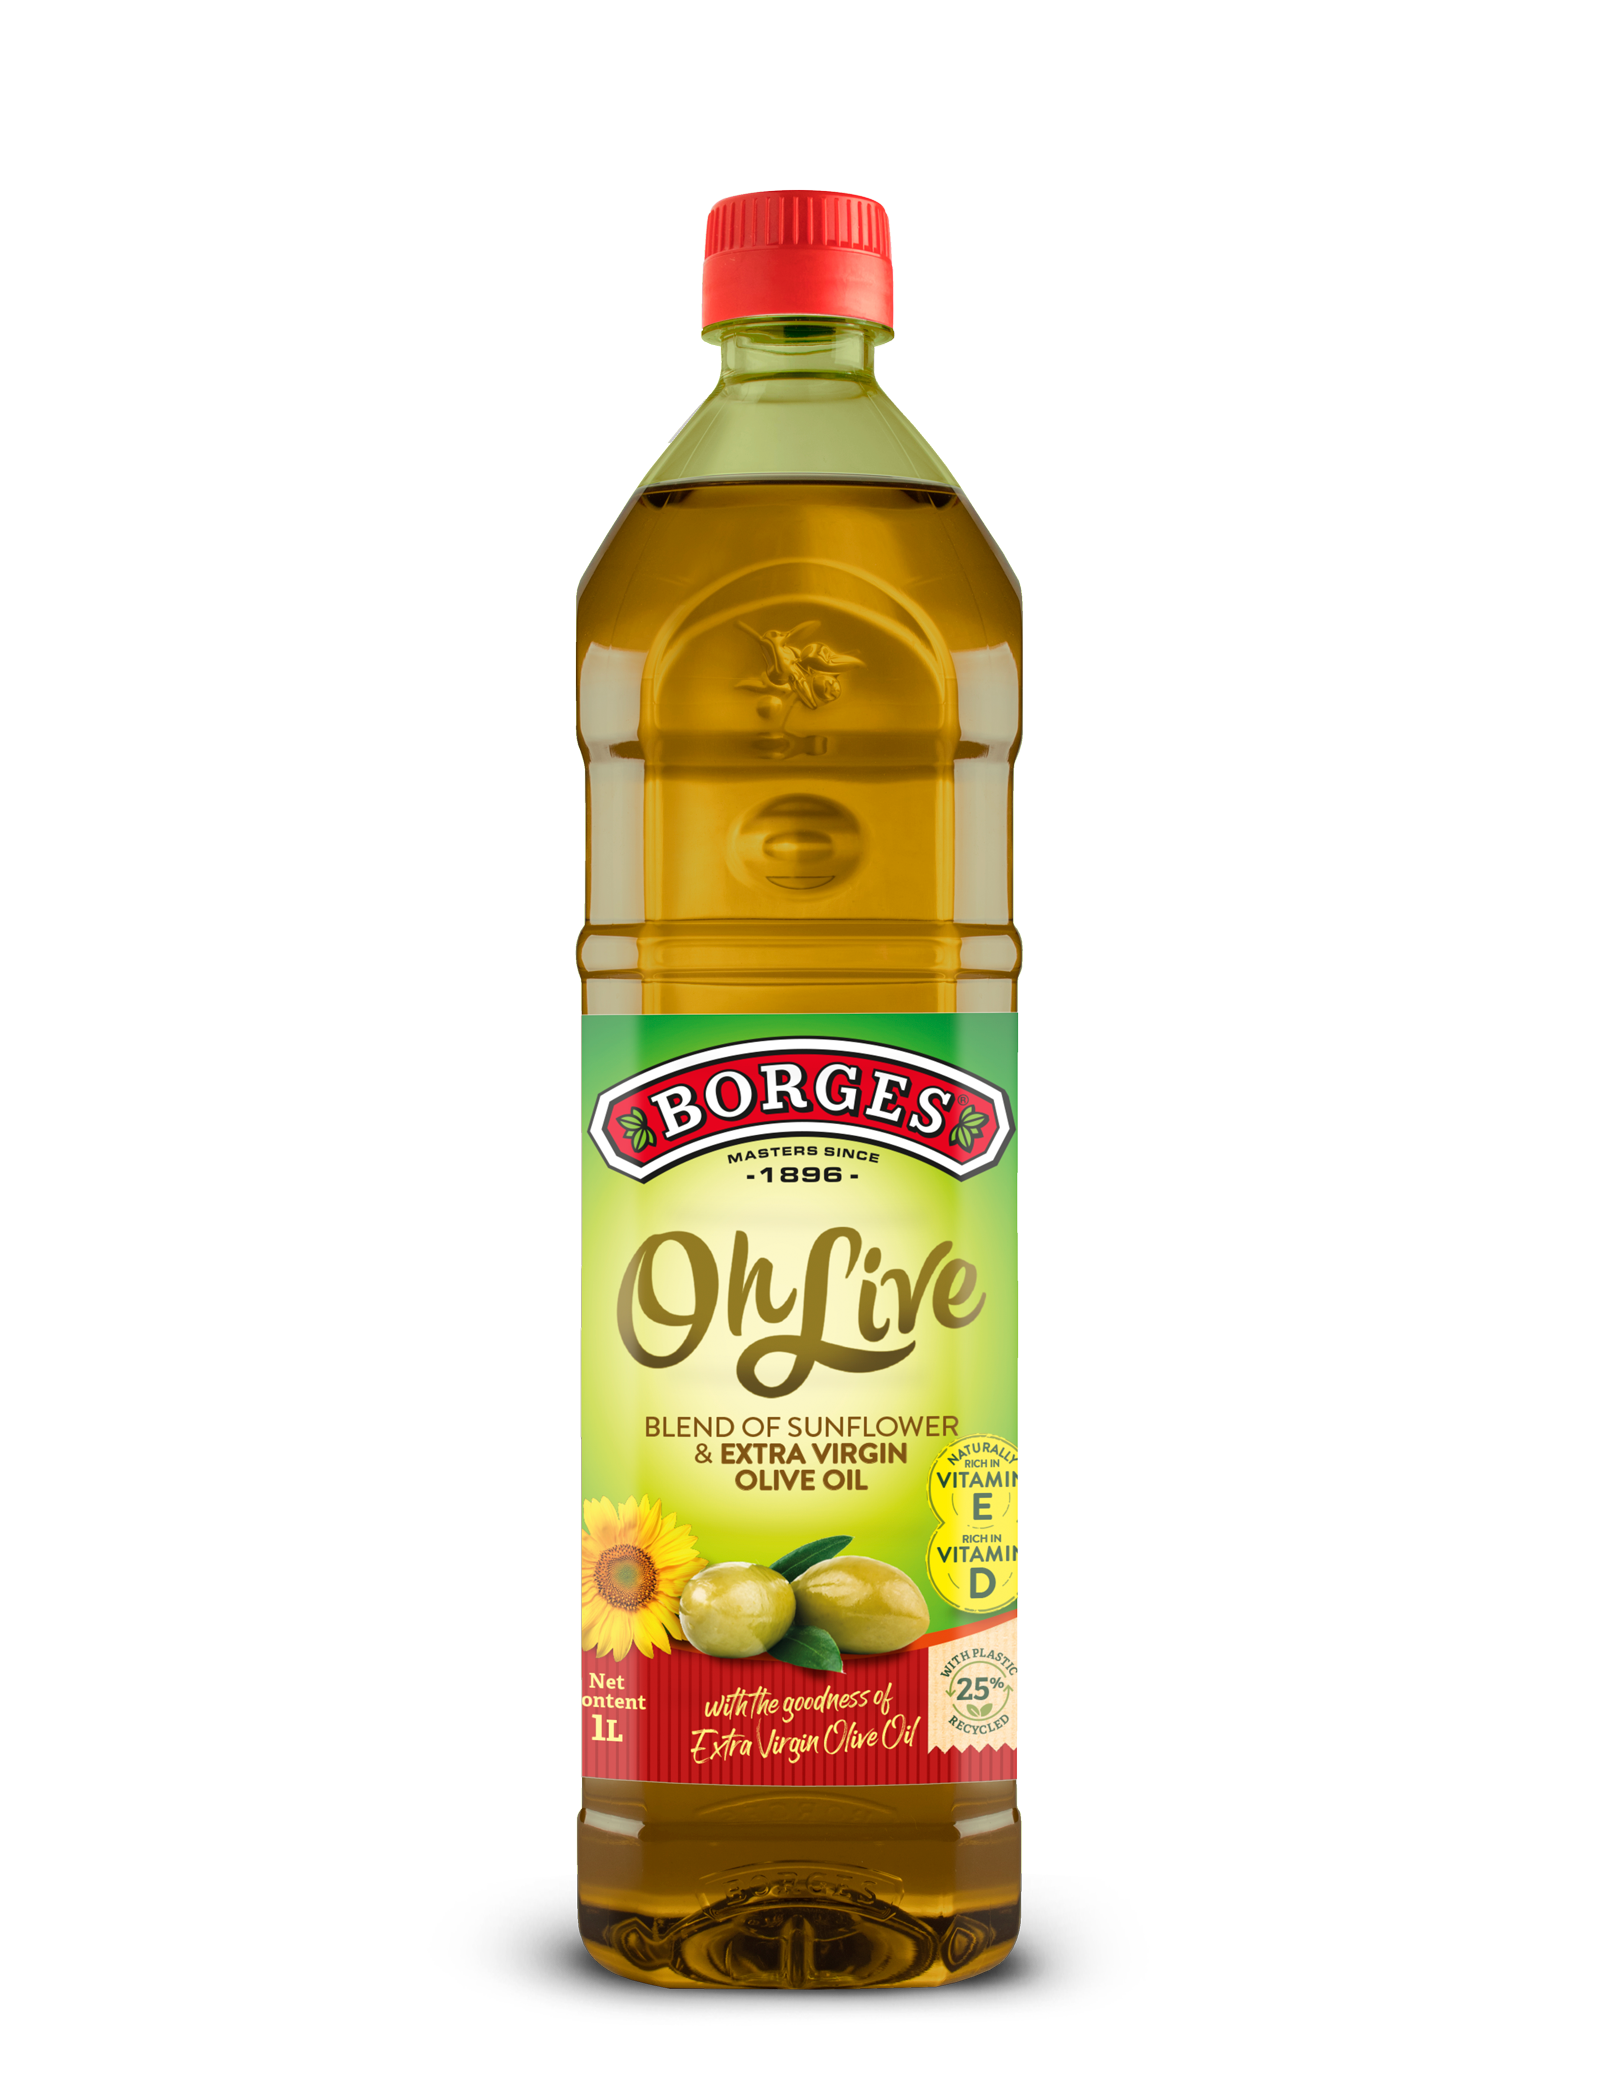 Borges oh live sunflower and extra virgin olive oil